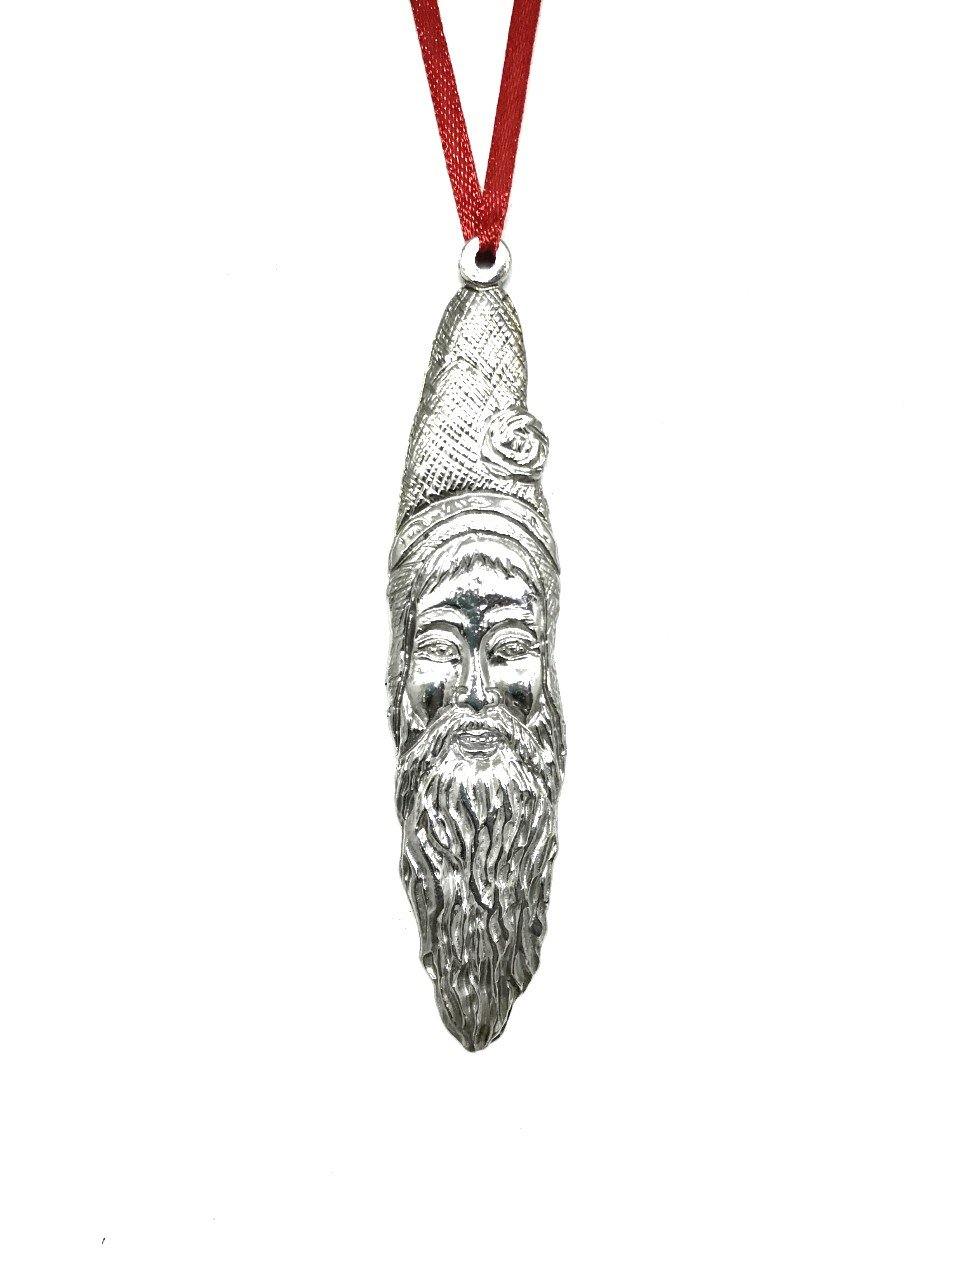 874 Santa Claus Sickle Beard Christmas Holiday Ornament Pewter - House of Morgan Pewter